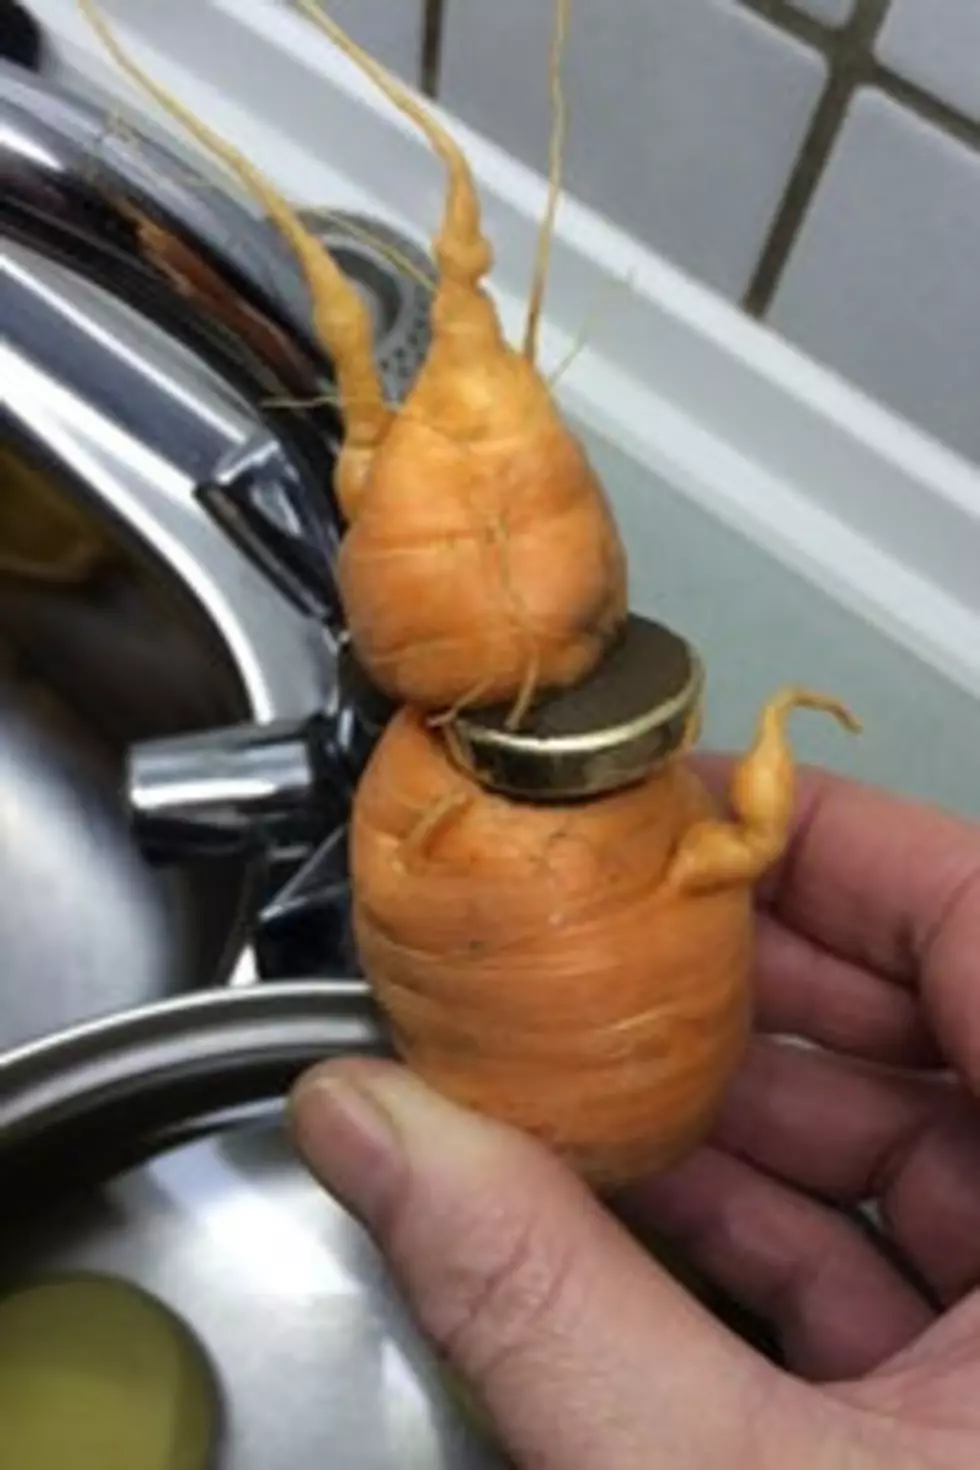 Man’s Lost Wedding Ring Reappears 3 Years Later Wrapped Around a Carrot